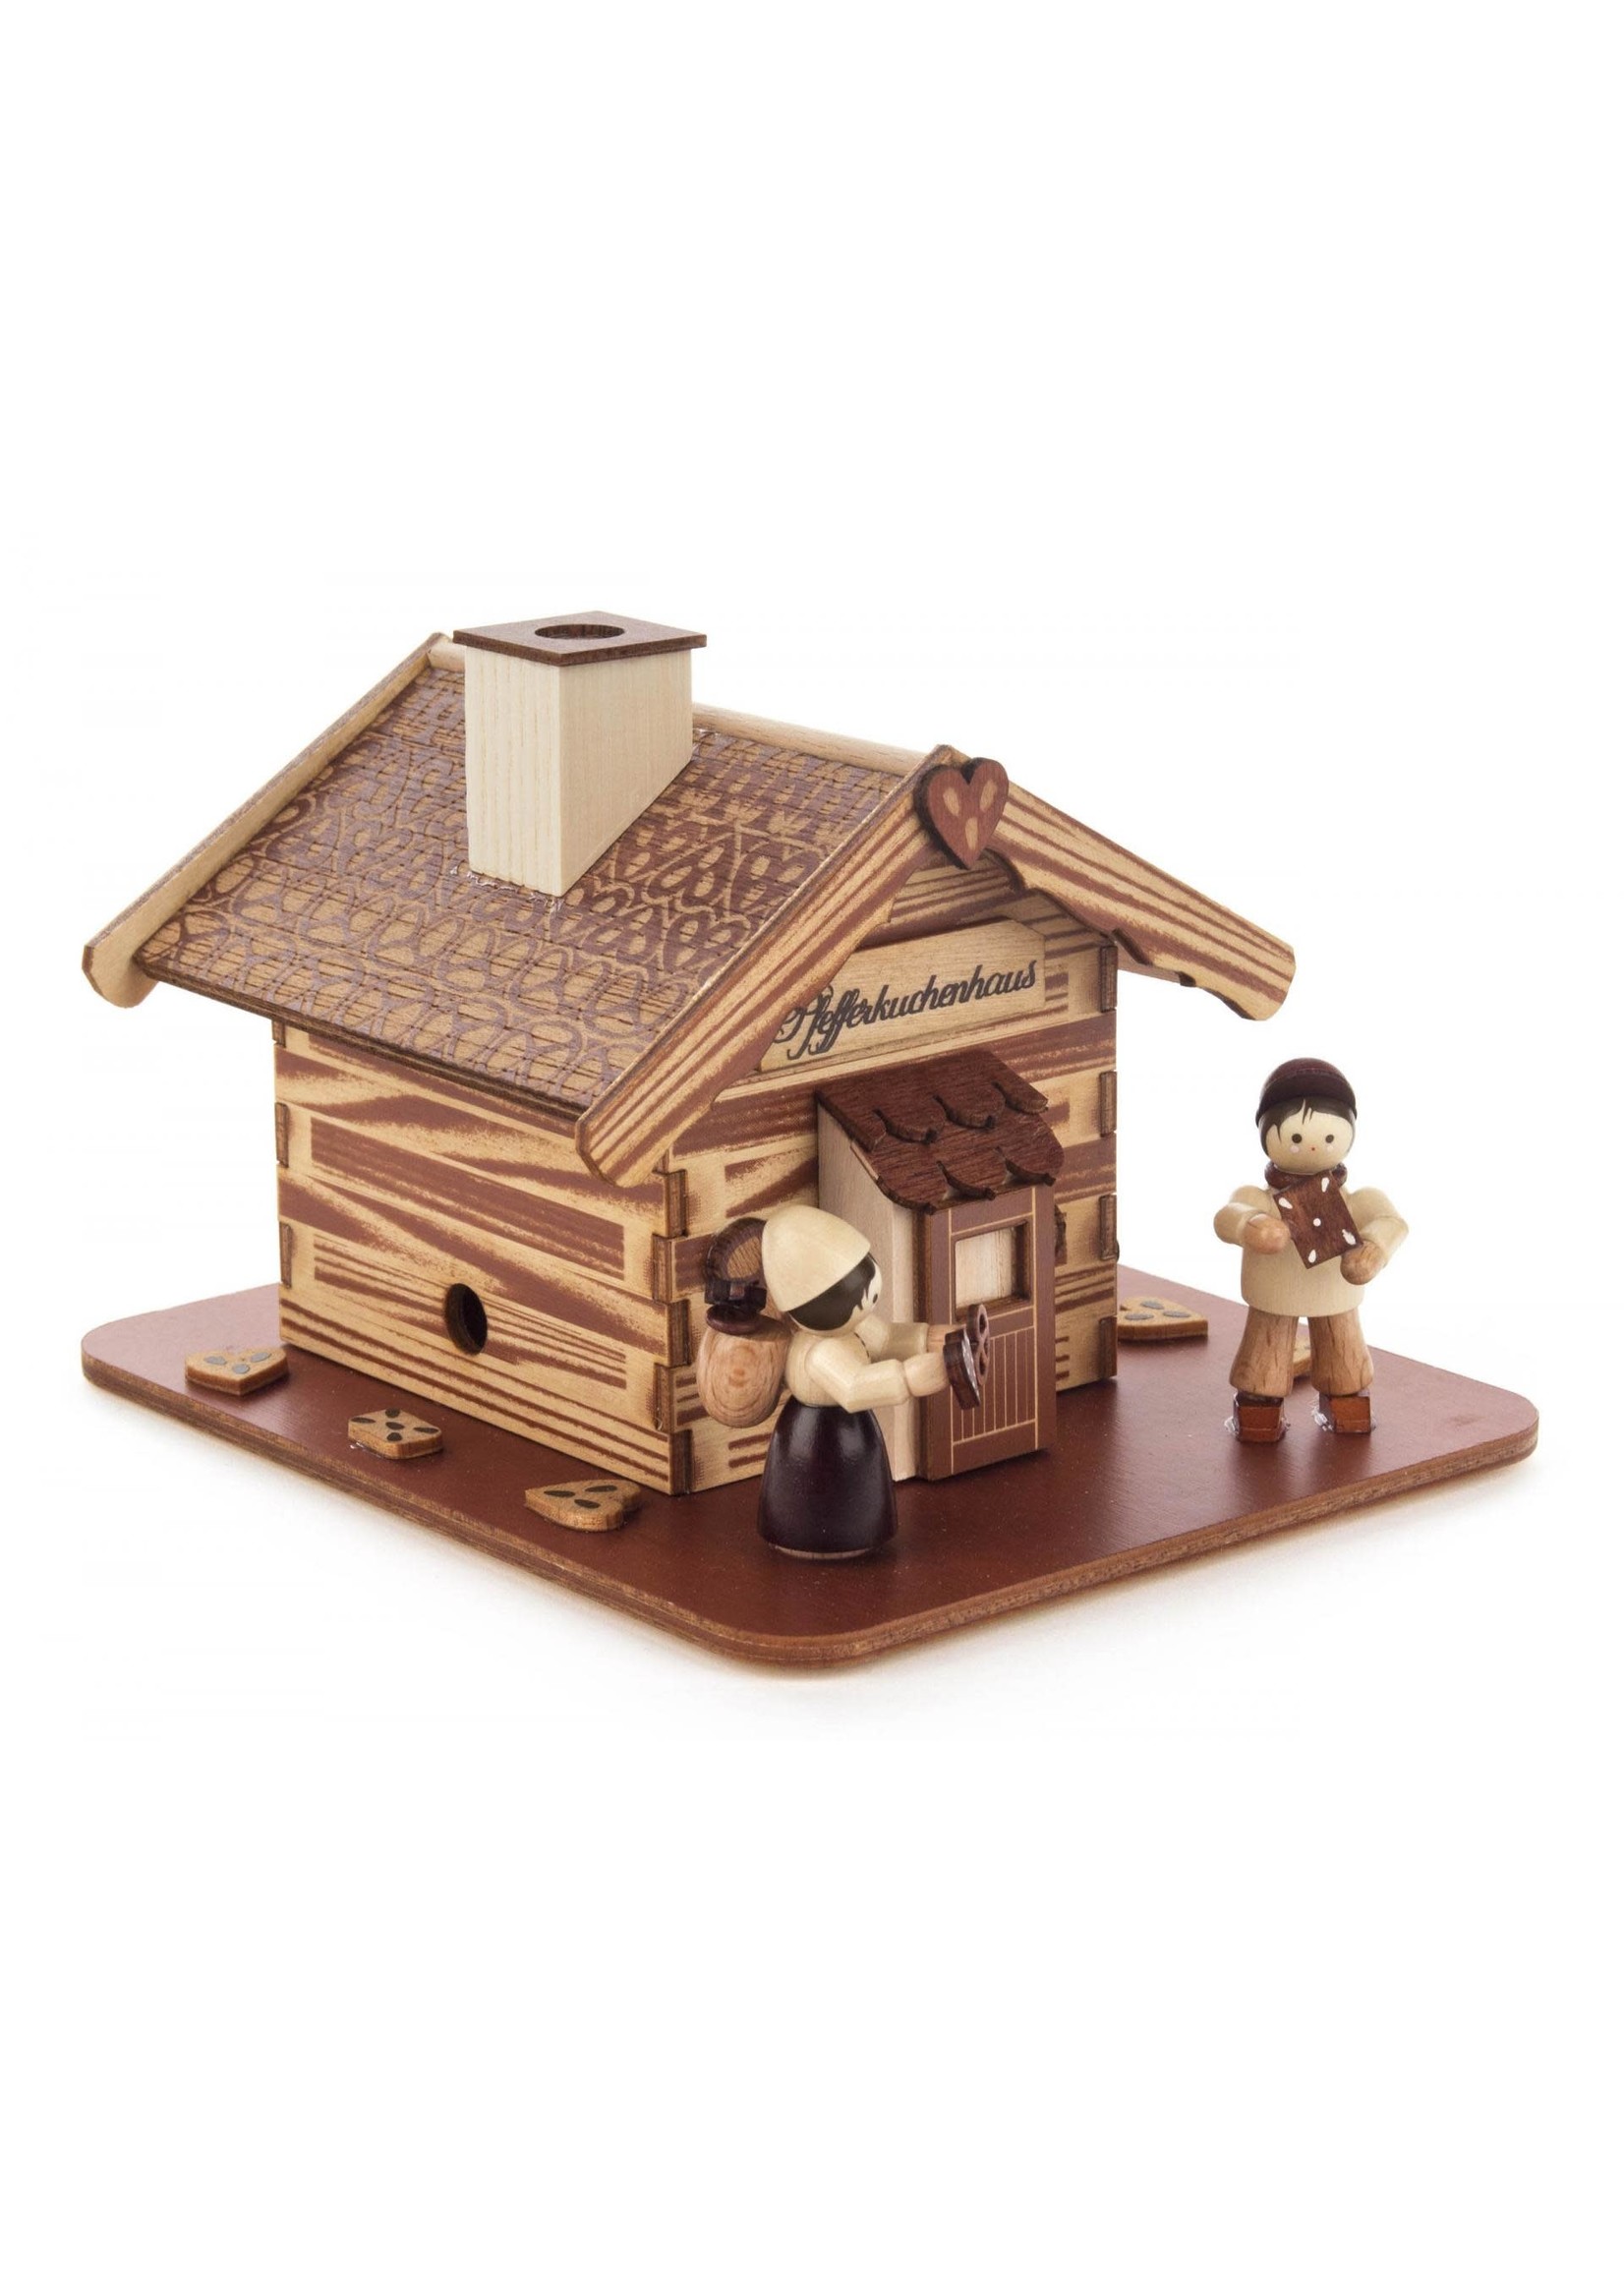 Smoker House - Gingerbread with Hänsel and Gretel